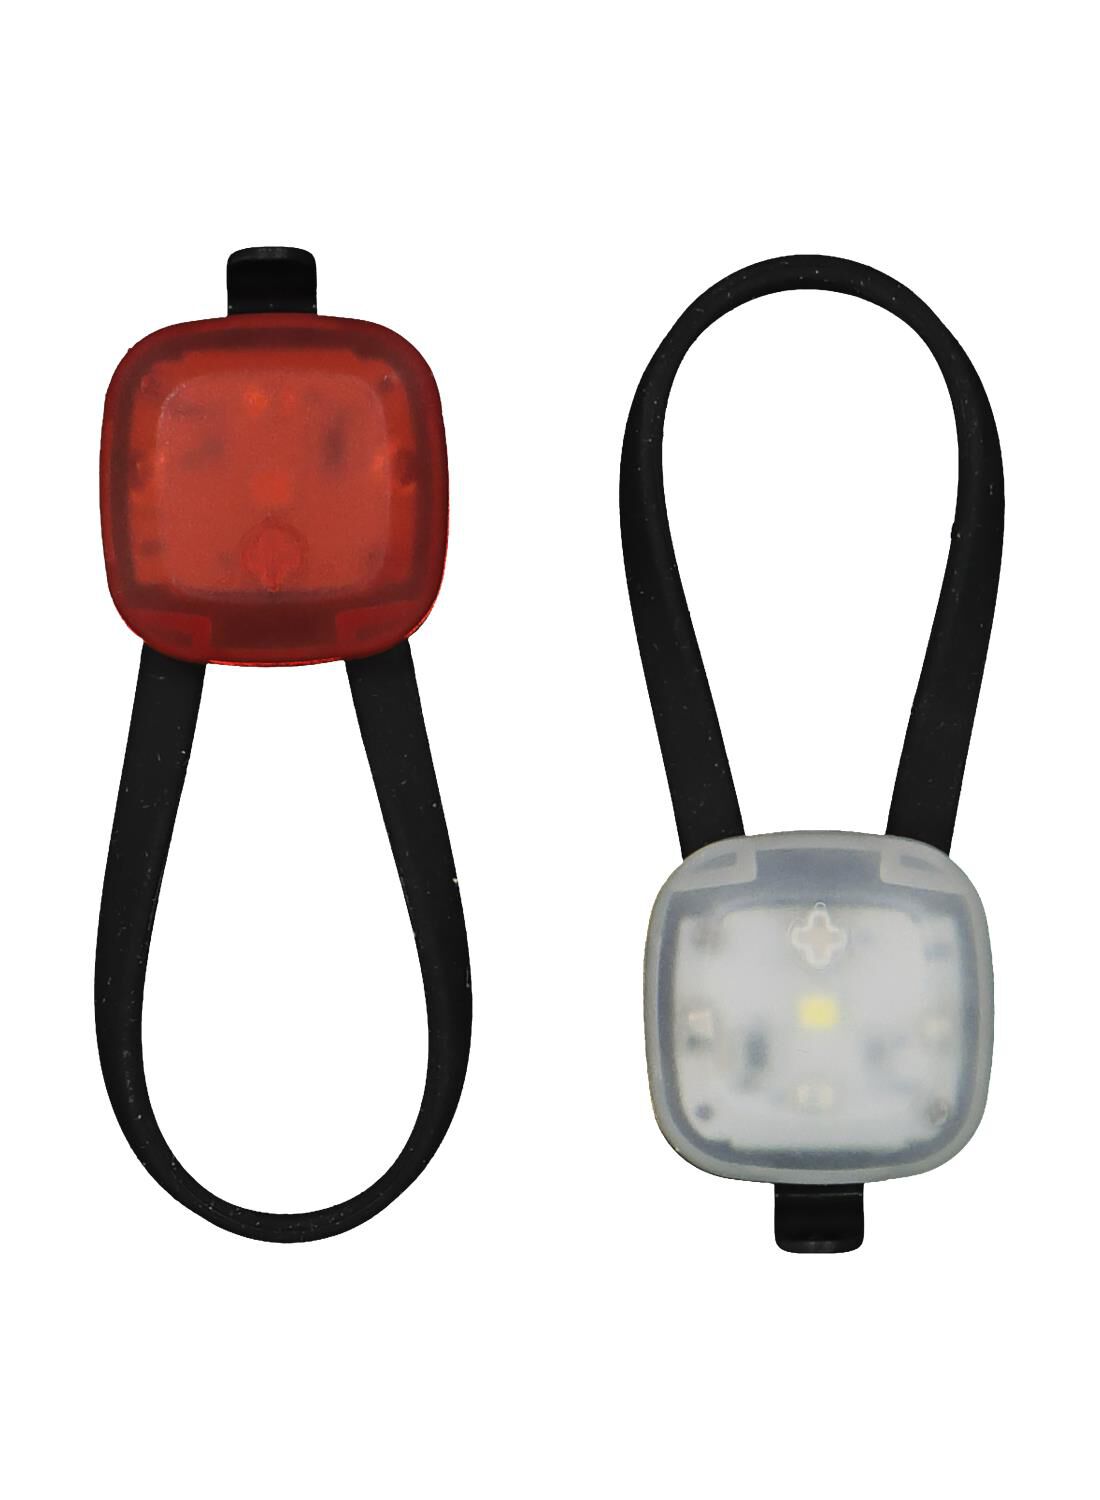 small led lights for bikes